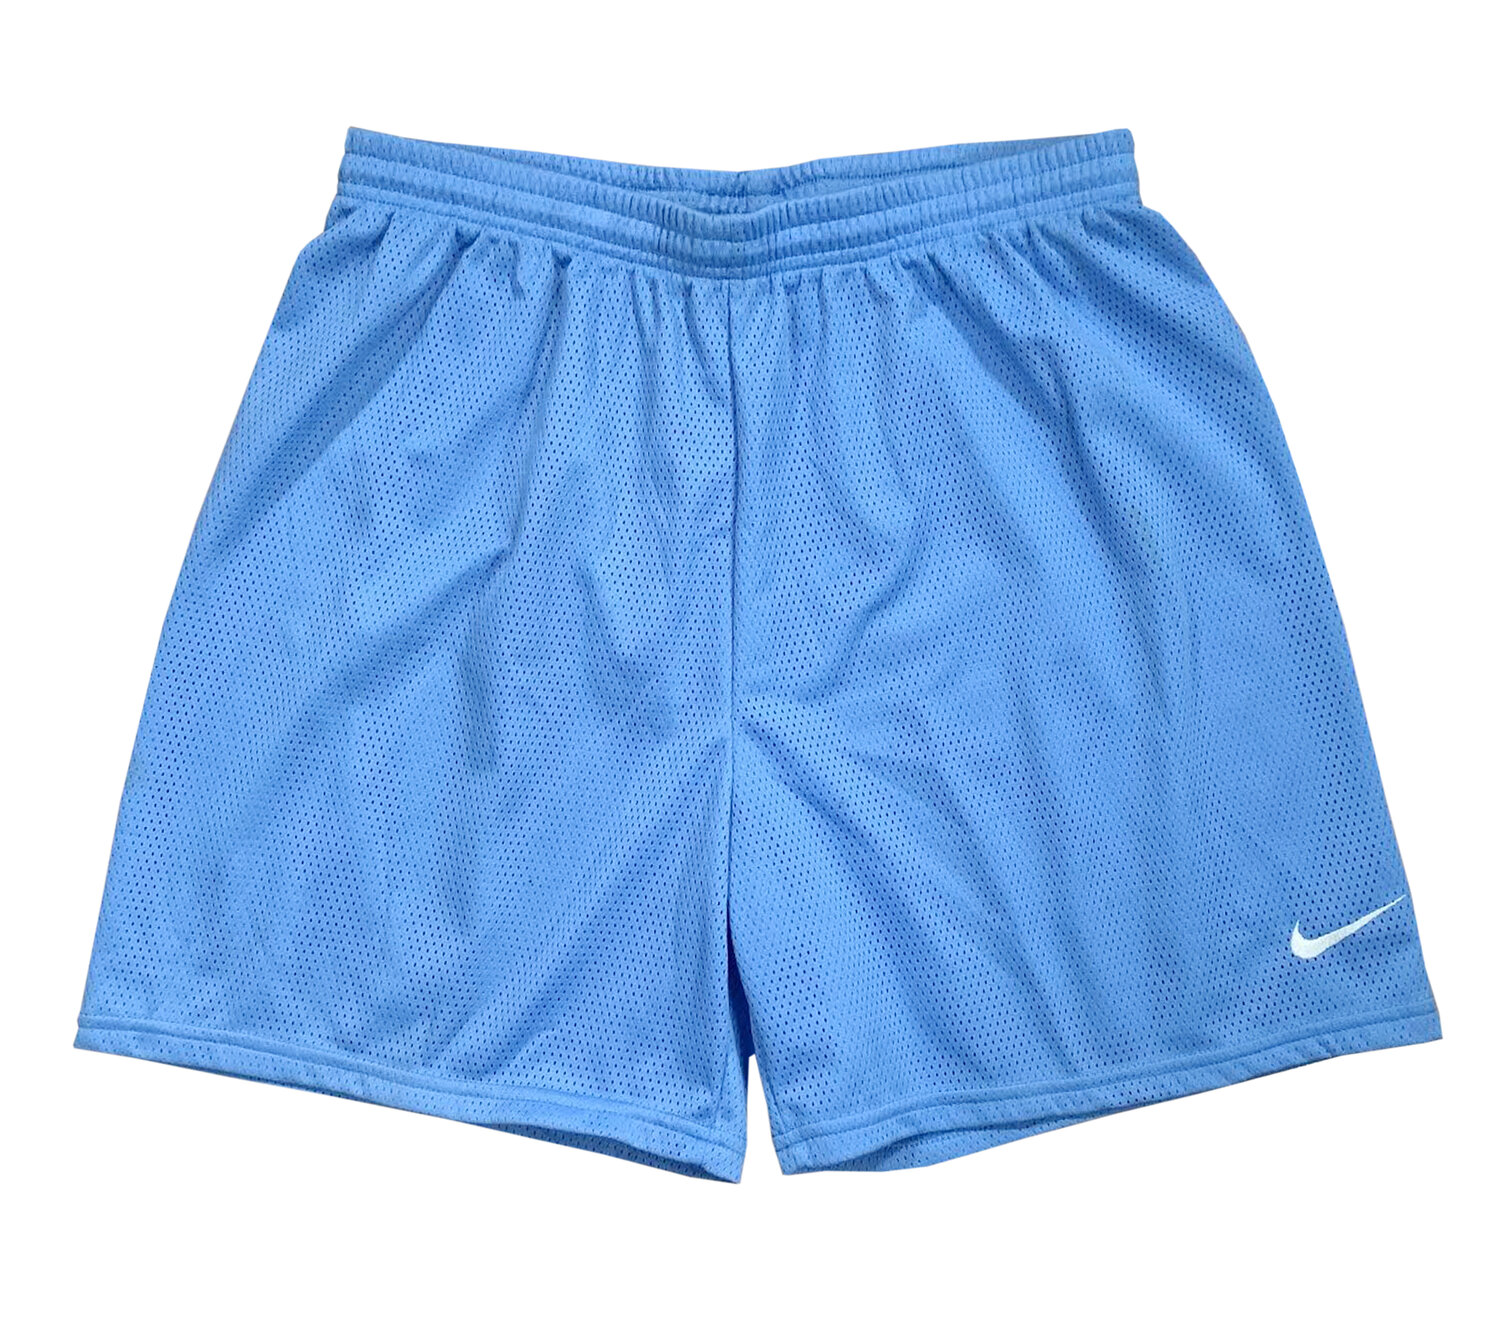 2t Light Blue Basketball Shorts(Available For Sale)